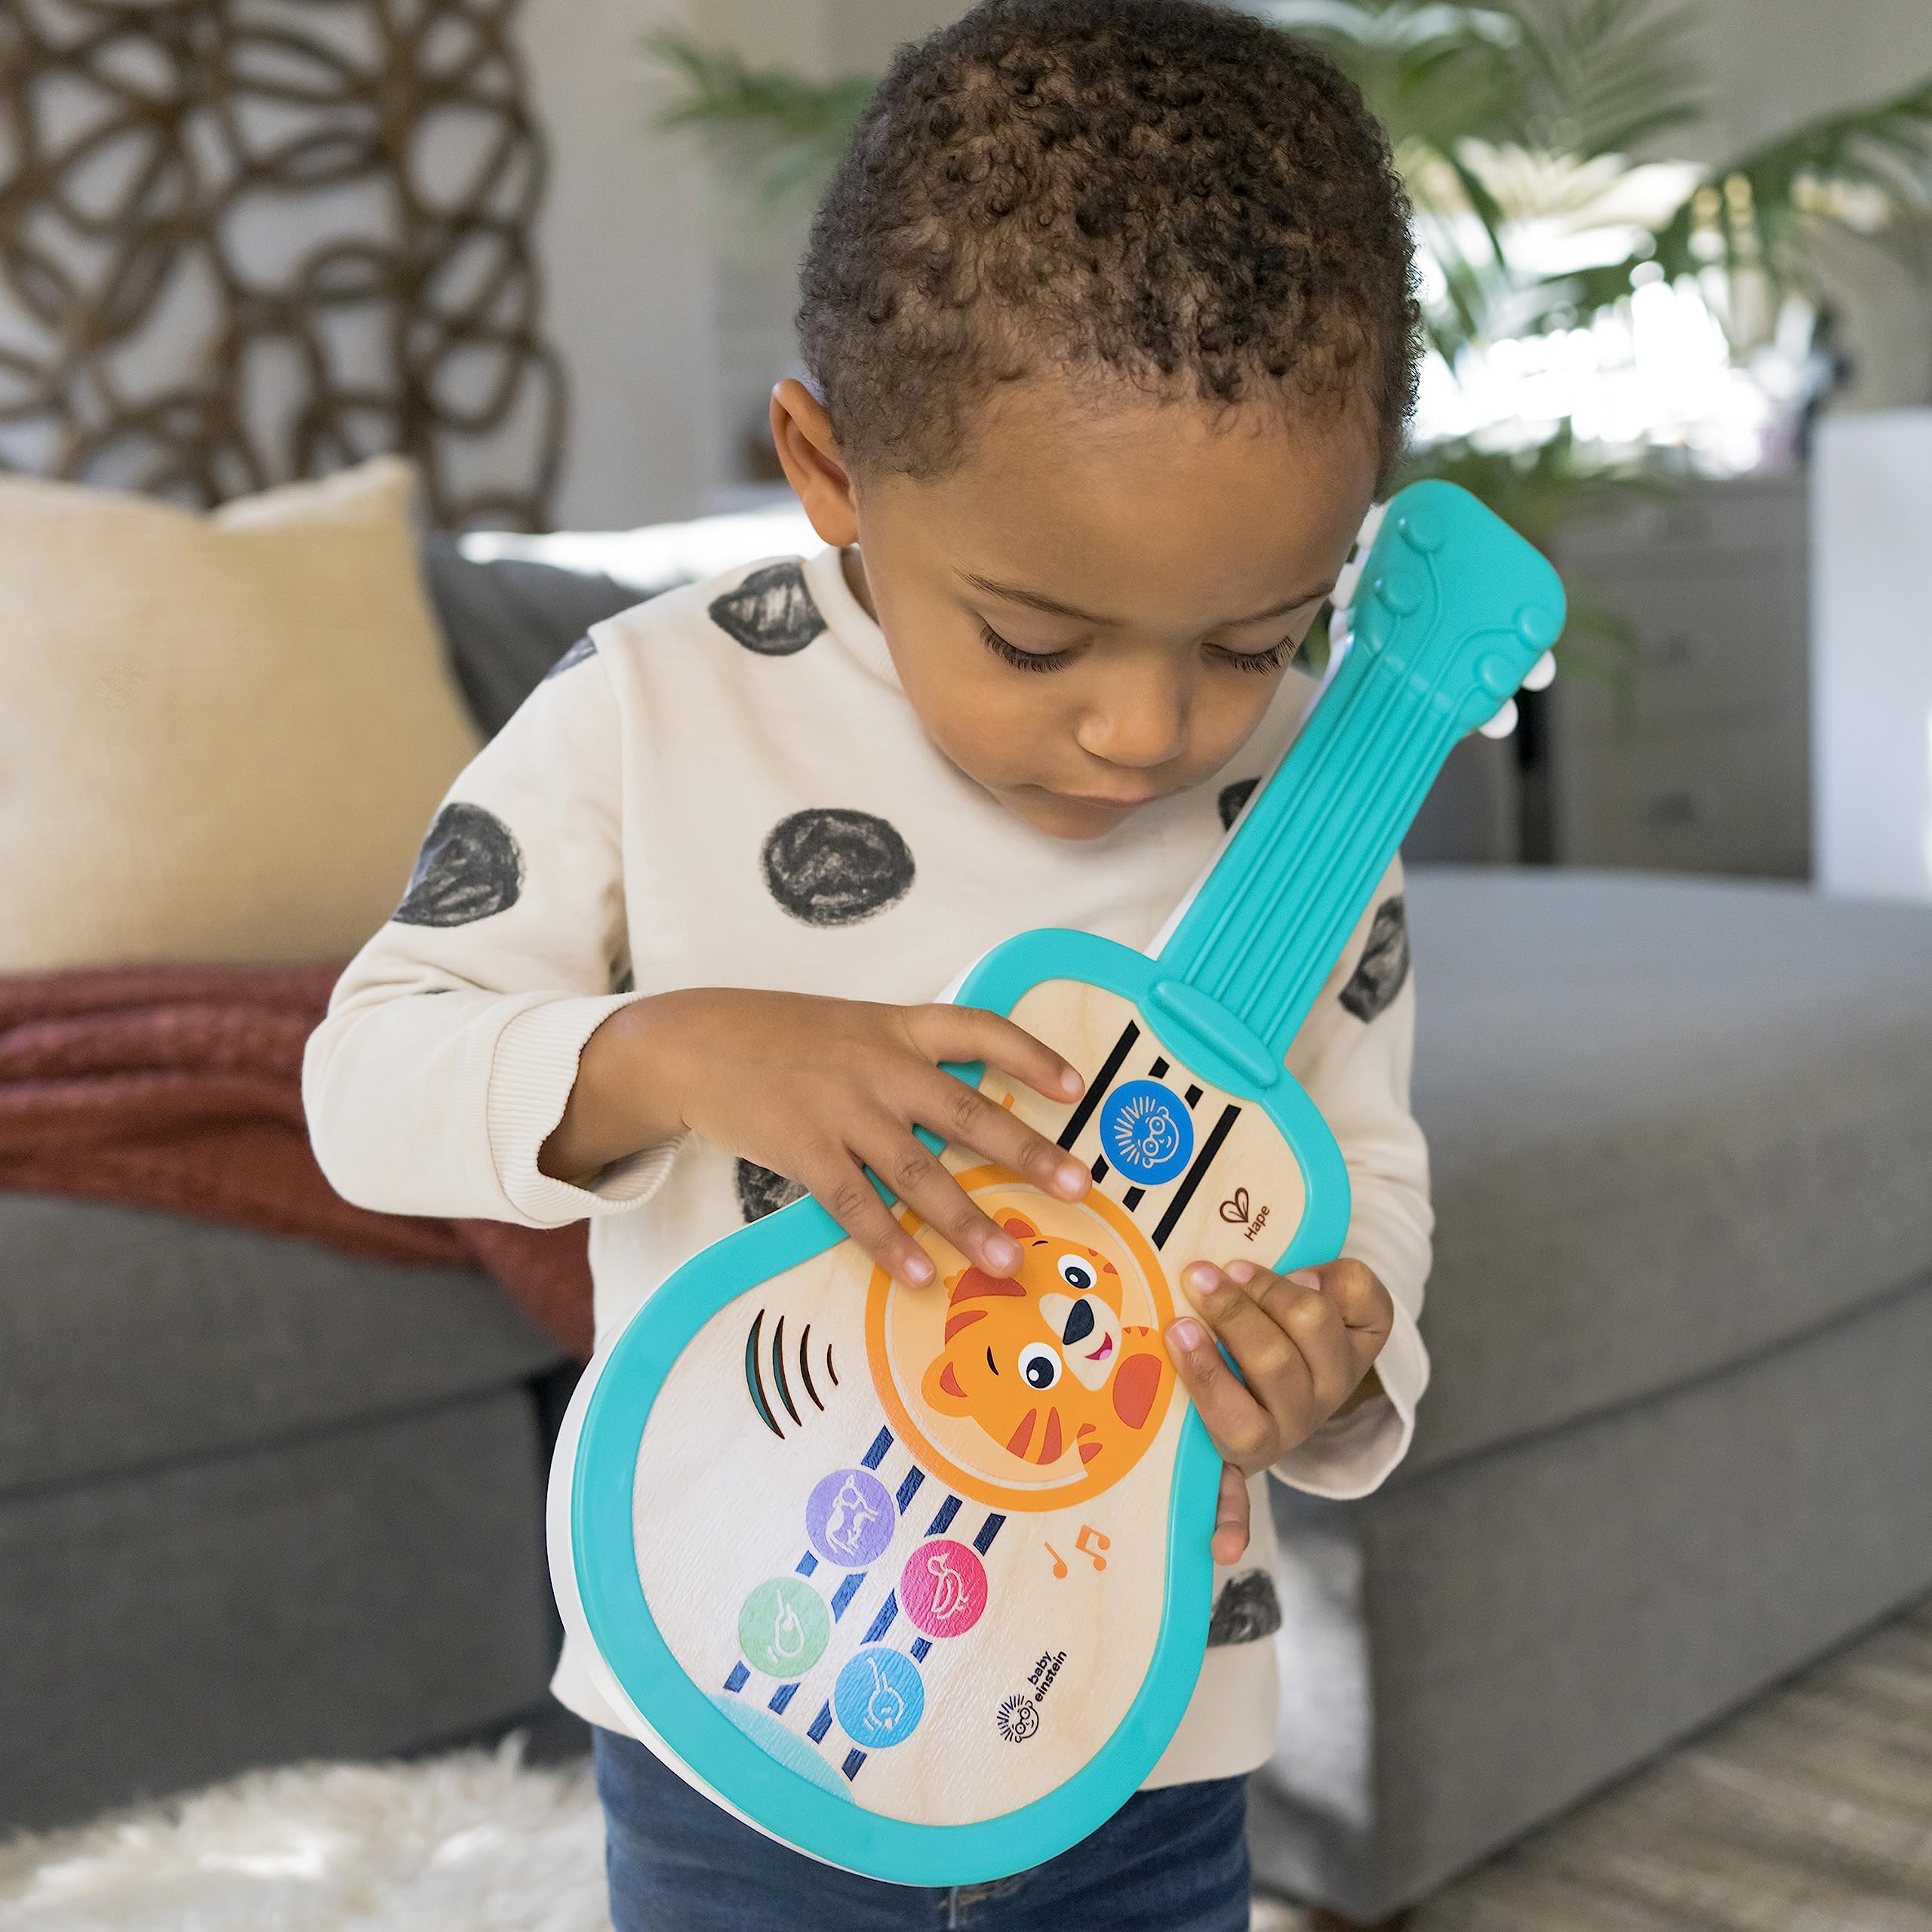 Baby Einstein Sing & Strum Magic Touch Ukulele Wooden Musical Toy, Ages 6 Months+, Multicolored